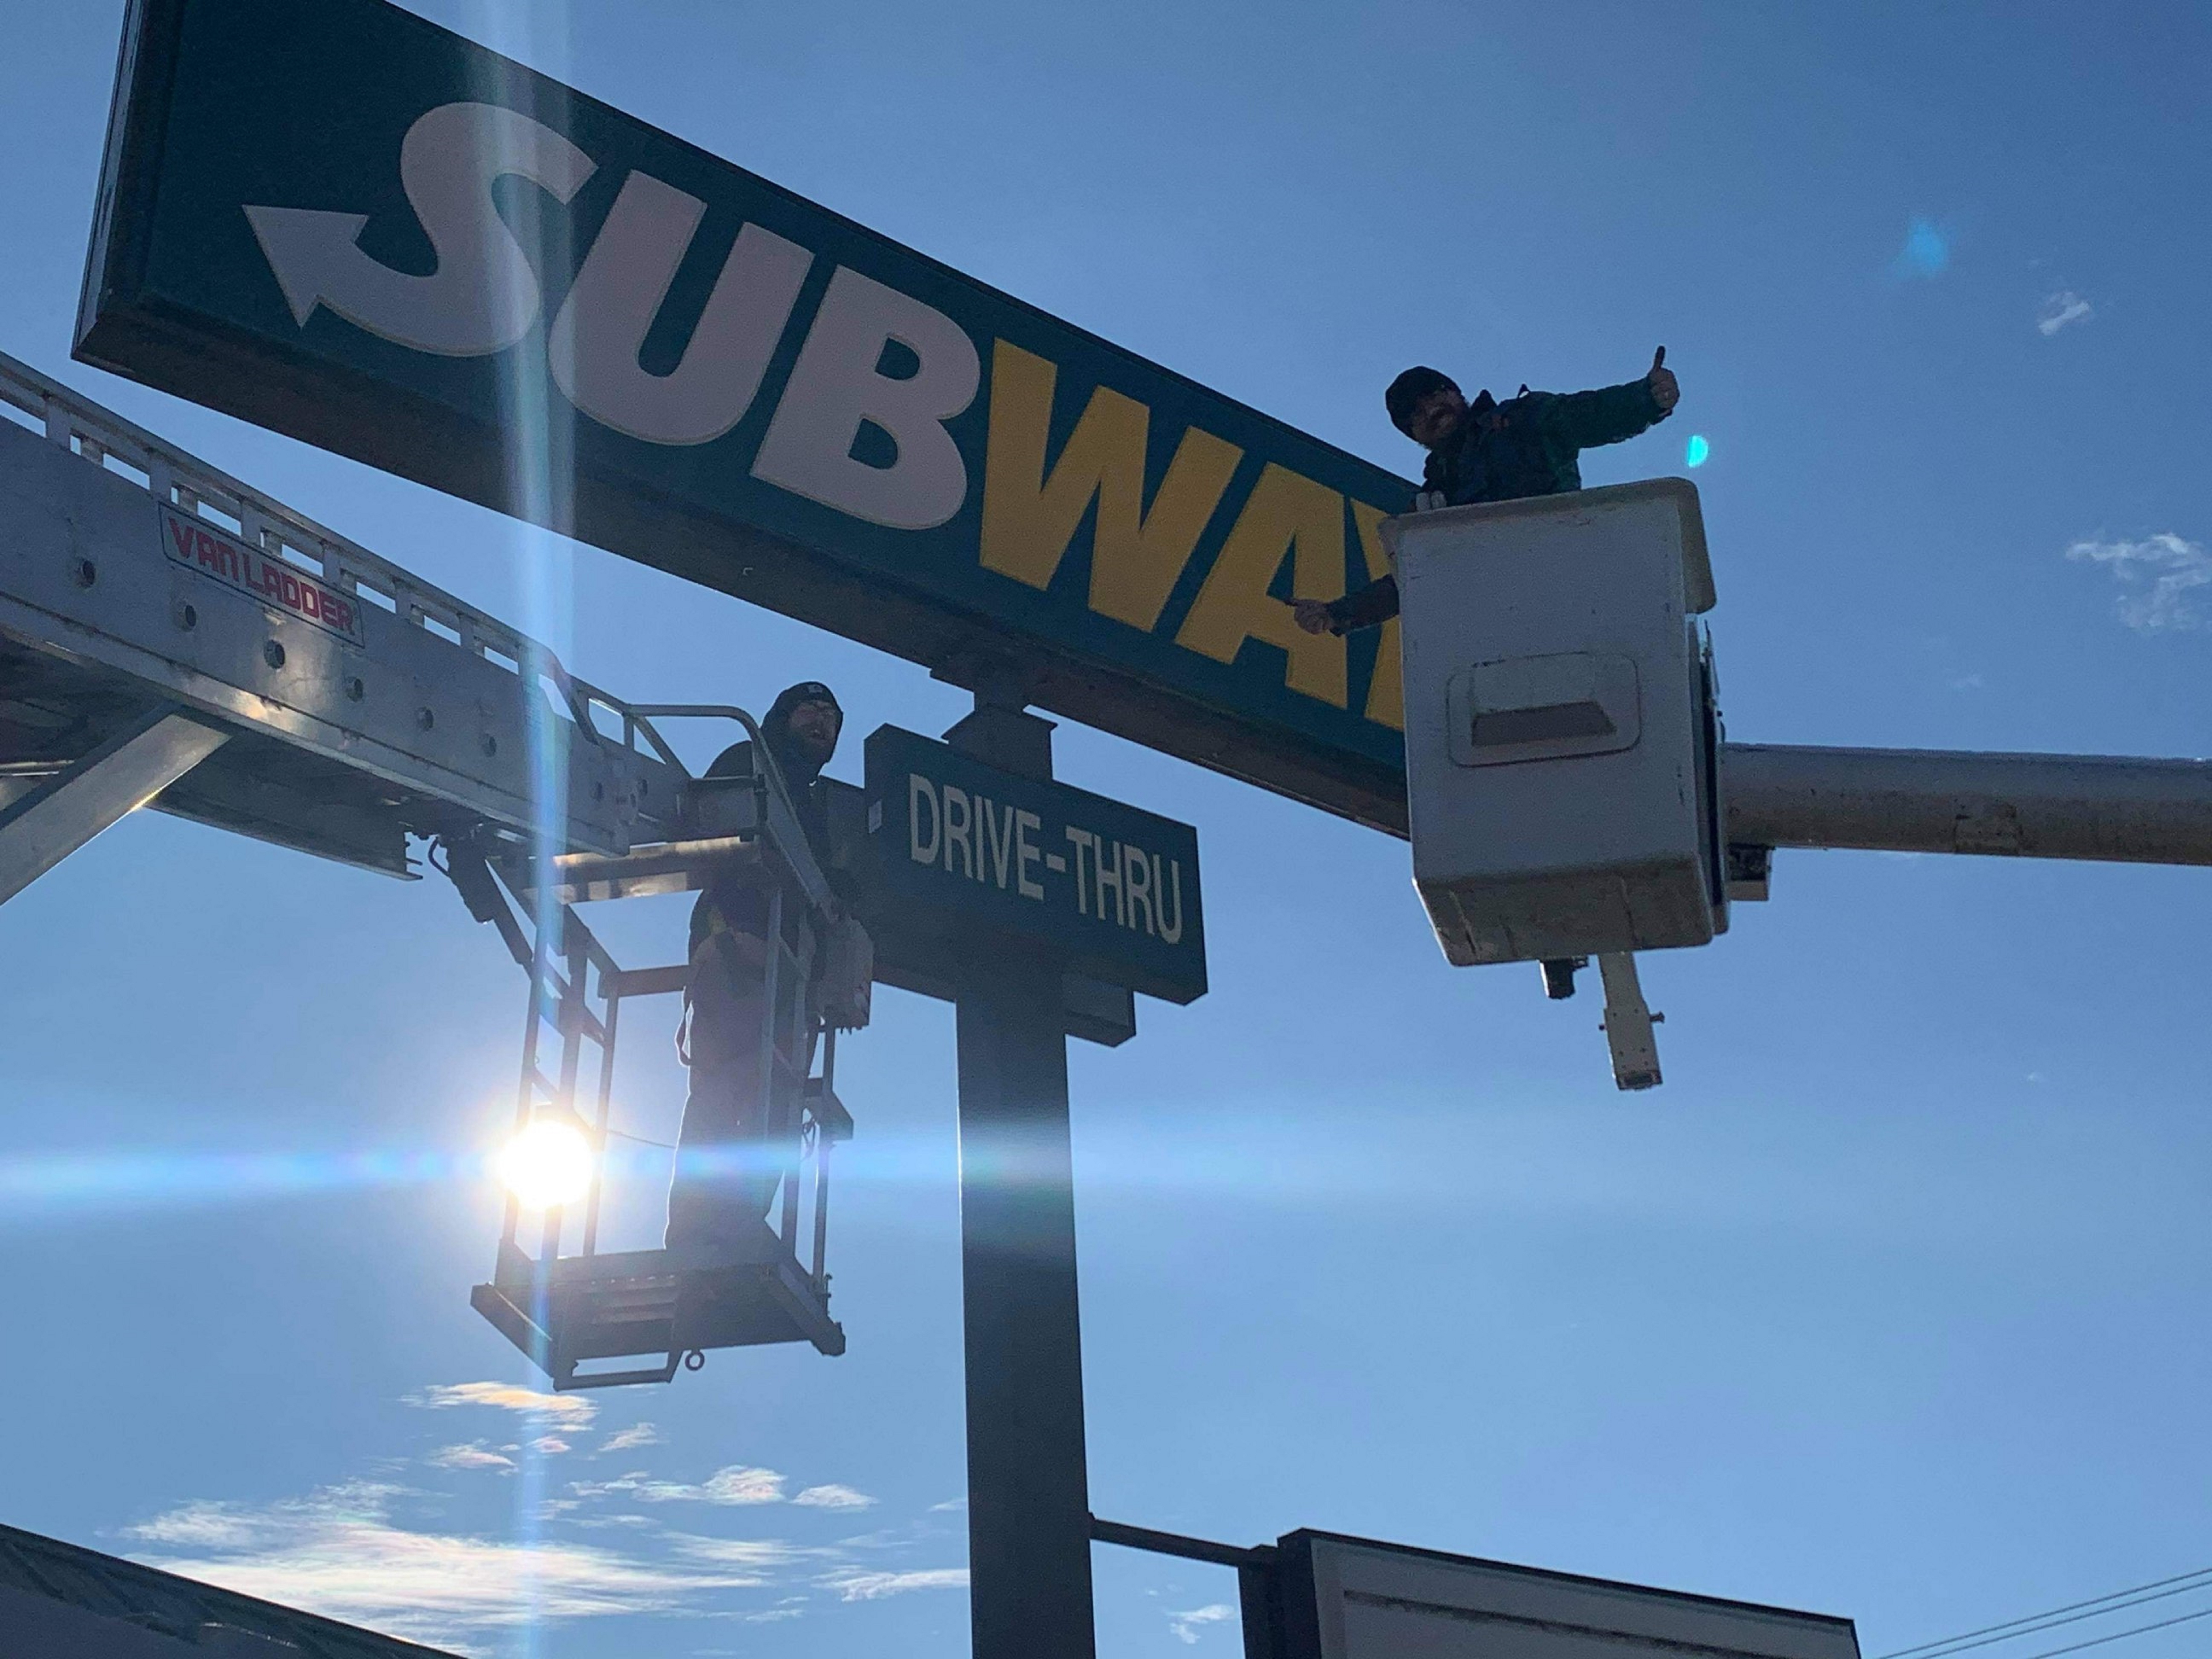 Upgrading Subway signs in Mt. Sterling